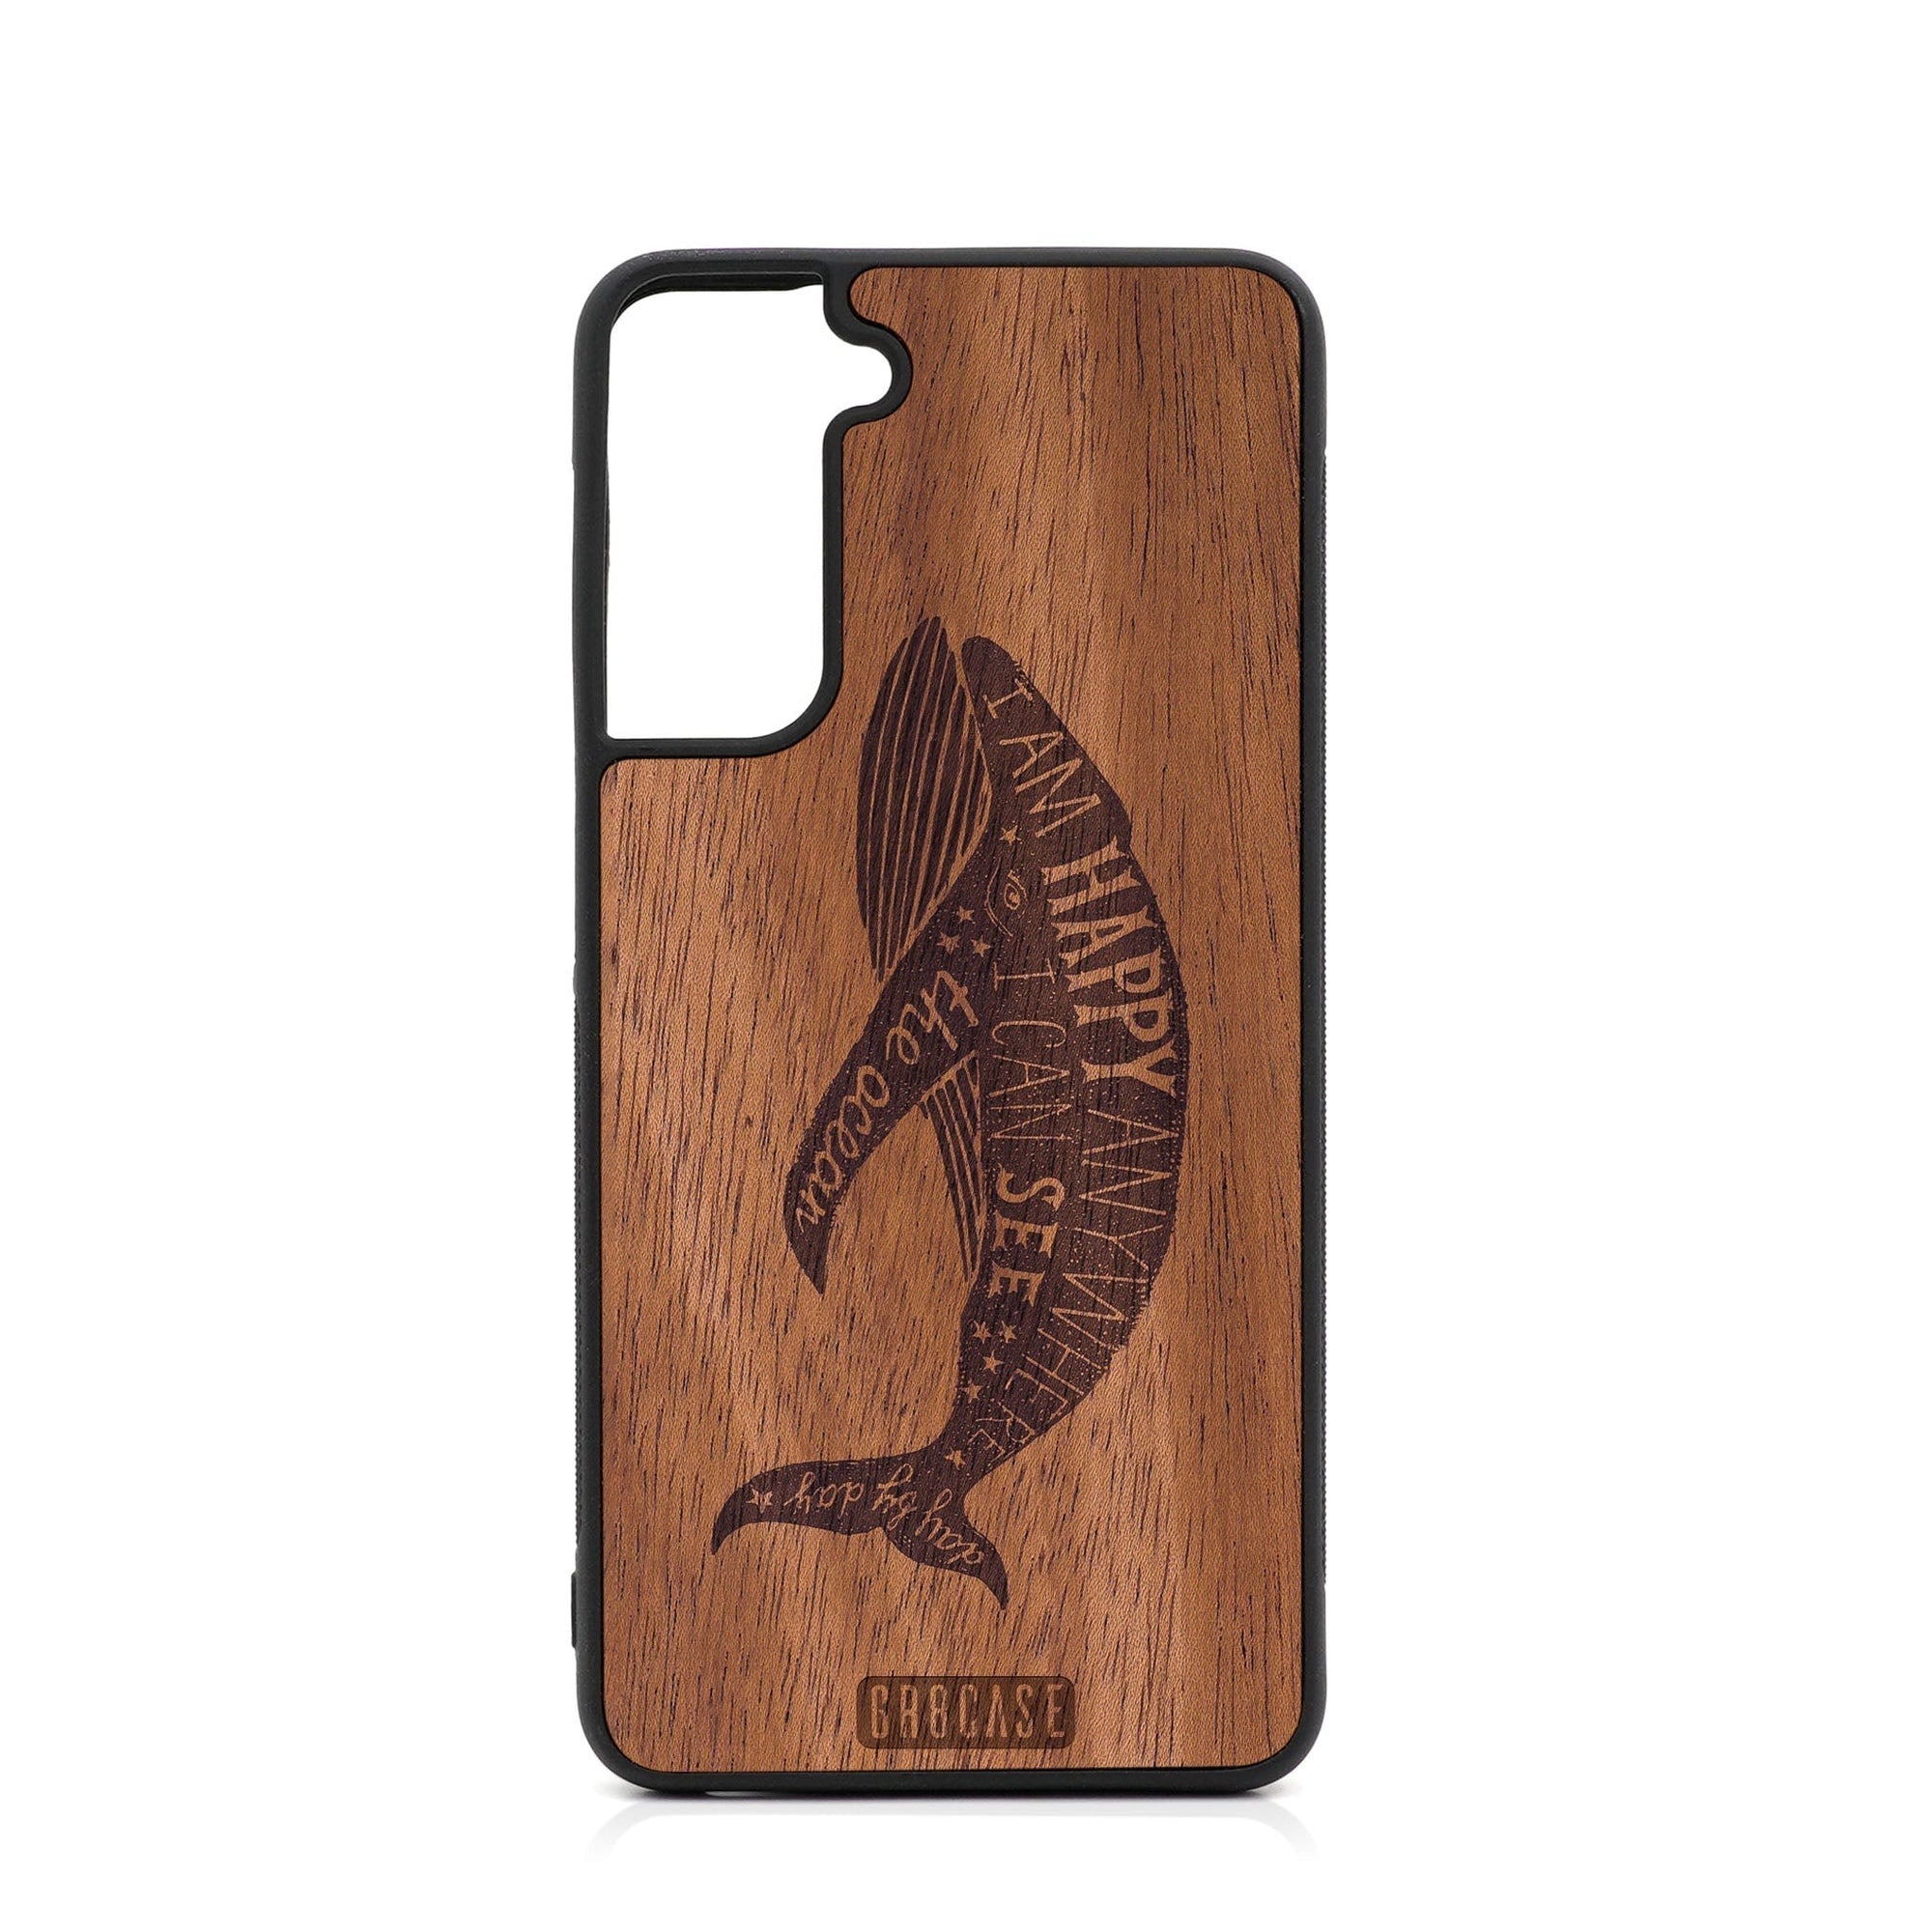 I'm Happy Anywhere I Can See The Ocean (Whale) Design Wood Case For Samsung Galaxy S21 FE 5G